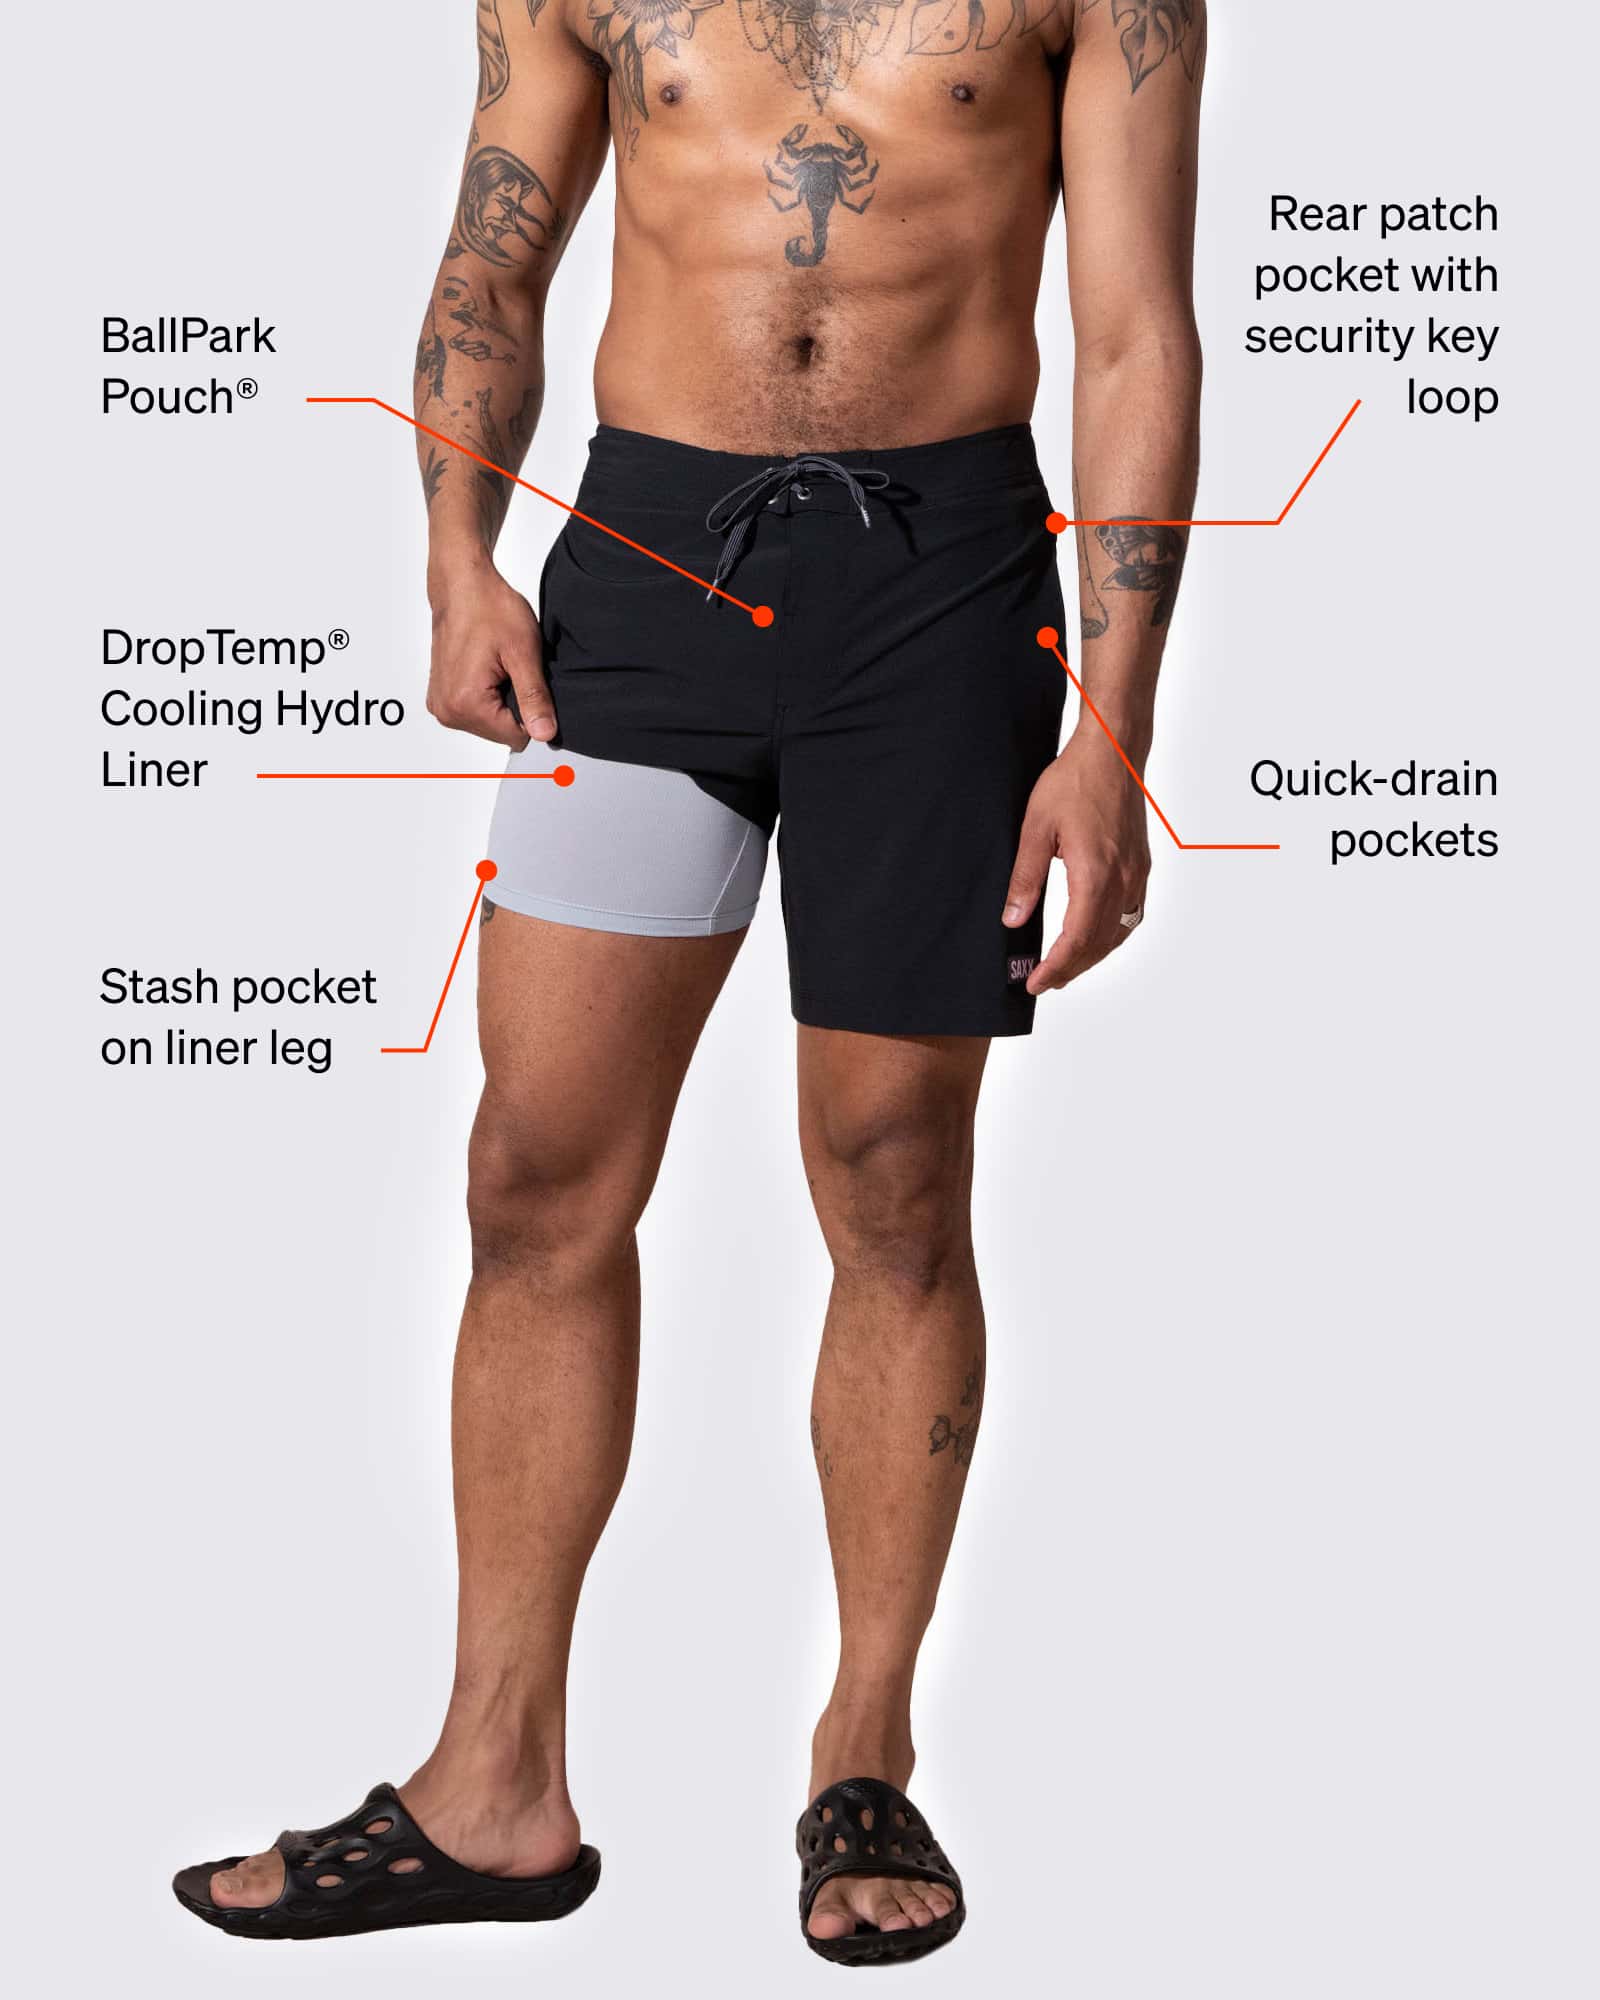 SAXX Underwear Betawave 2N1 Swim Short with BallPark Pouch and DropTemp Cooling Hydro Liner technology